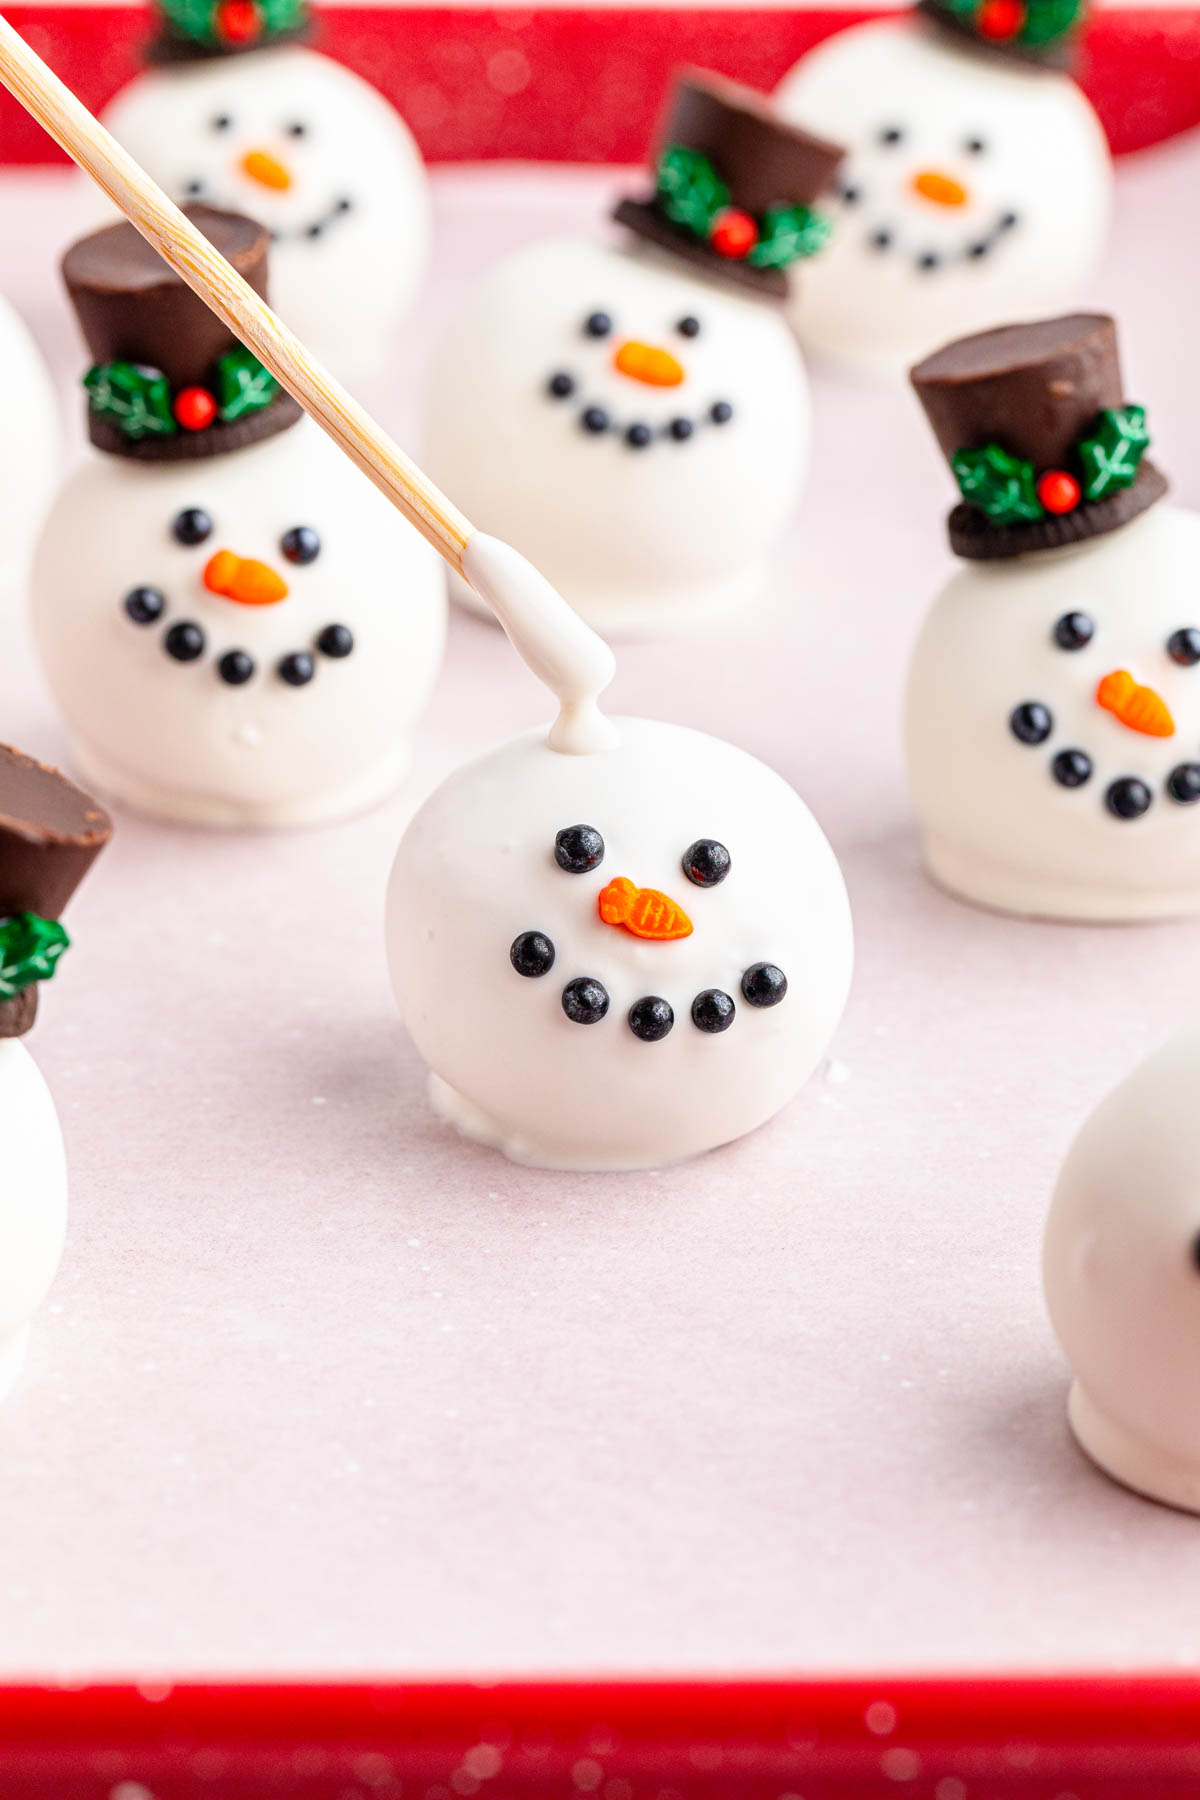 Snowman Oreo balls on a tray with a stick dipped in chocolate in the middle.